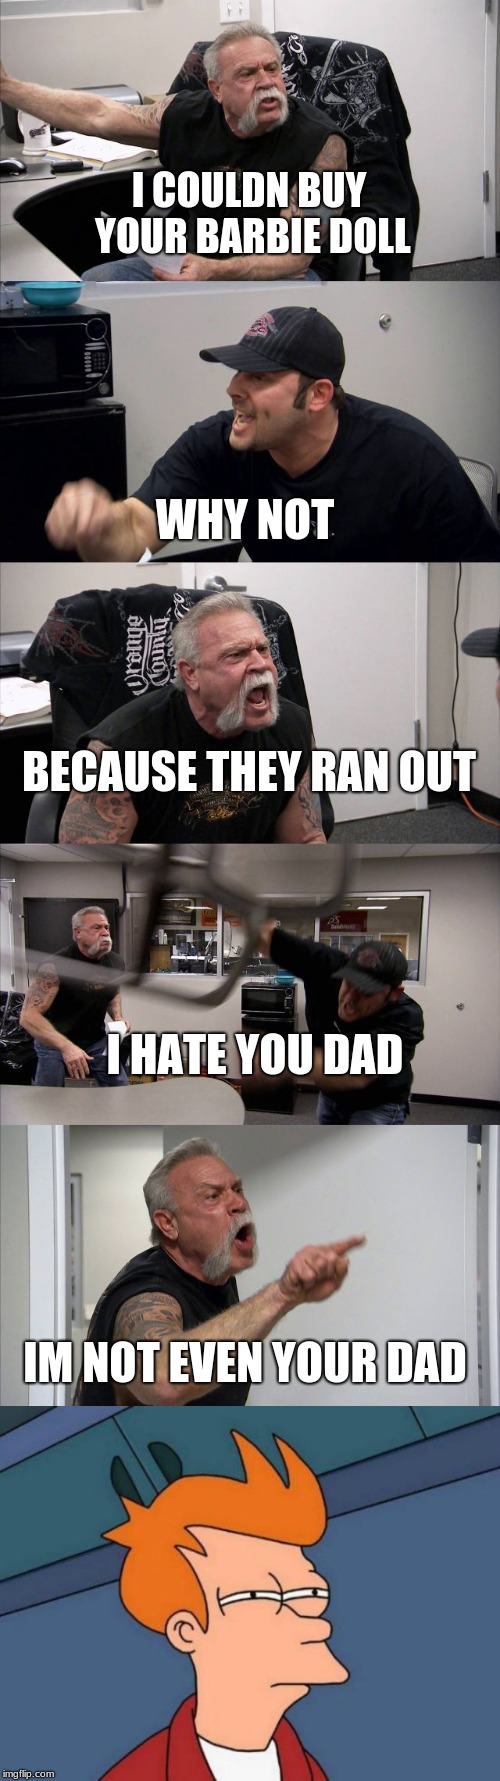 I COULDN BUY YOUR BARBIE DOLL; WHY NOT; BECAUSE THEY RAN OUT; I HATE YOU DAD; IM NOT EVEN YOUR DAD | image tagged in memes,futurama fry,american chopper argument | made w/ Imgflip meme maker